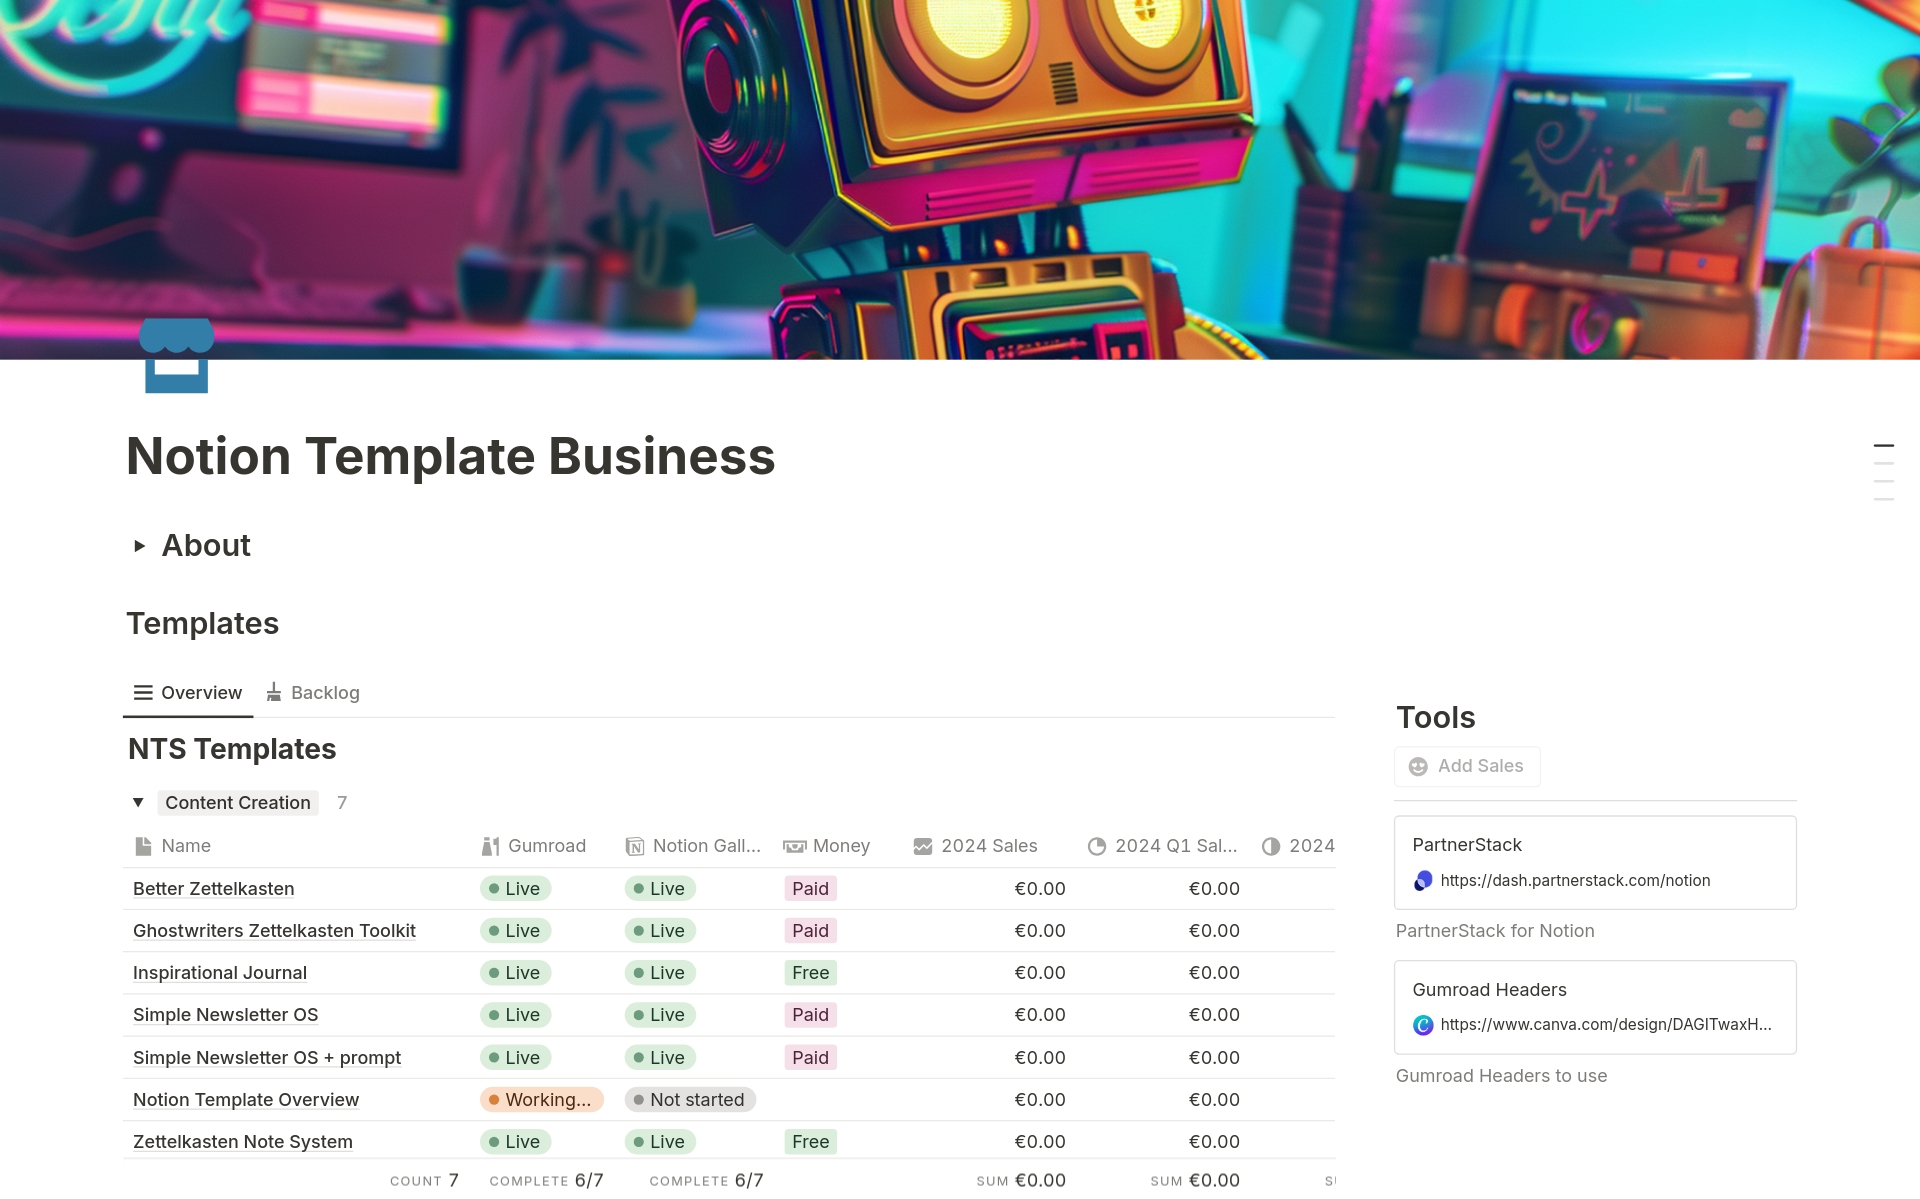 Are you an entrepreneur looking to streamline your Notion template business? Look no further! Introducing the Notion Template Business template – the ultimate tool to manage your Notion template production, publication, and sales tracking, all in one place.